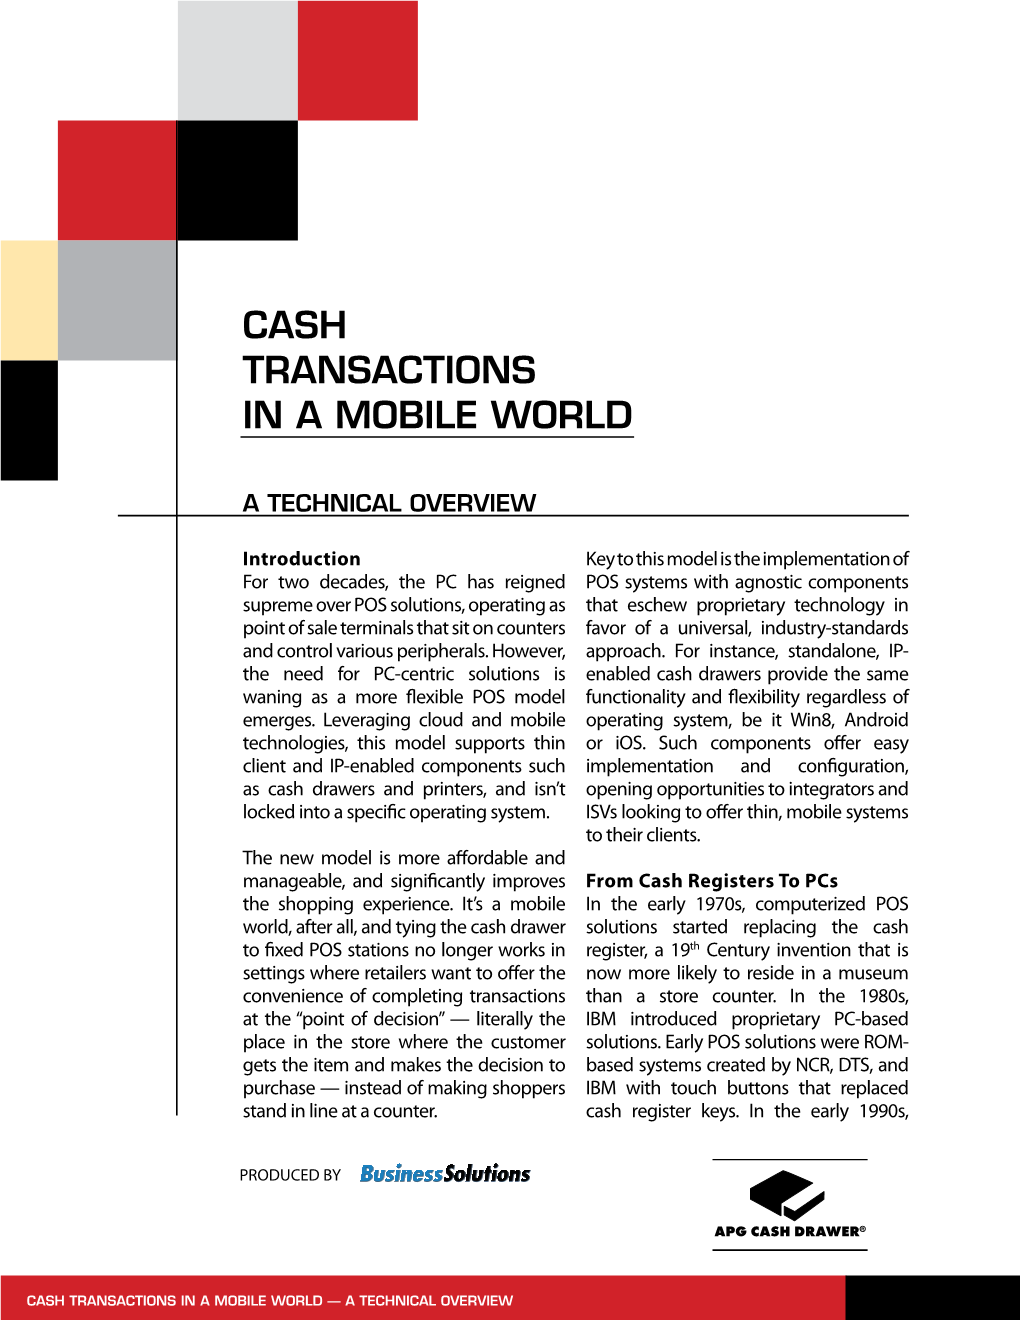 Cash Transactions in a Mobile World